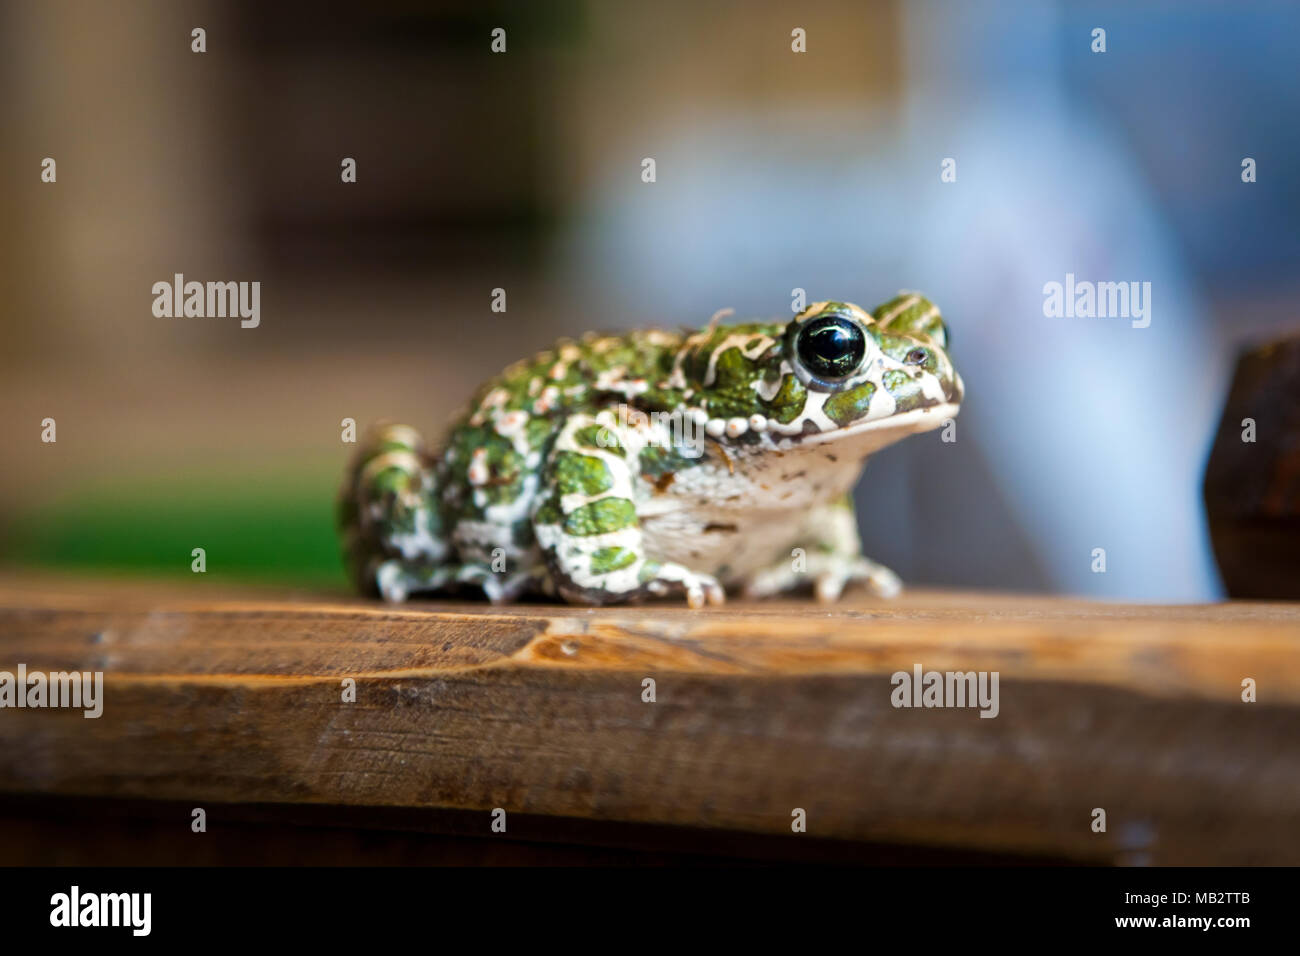 Close-up of a beautiful green spotted frog or Pelophylax ridibundus  with large black eyes sitting on a wooden shelf Stock Photo